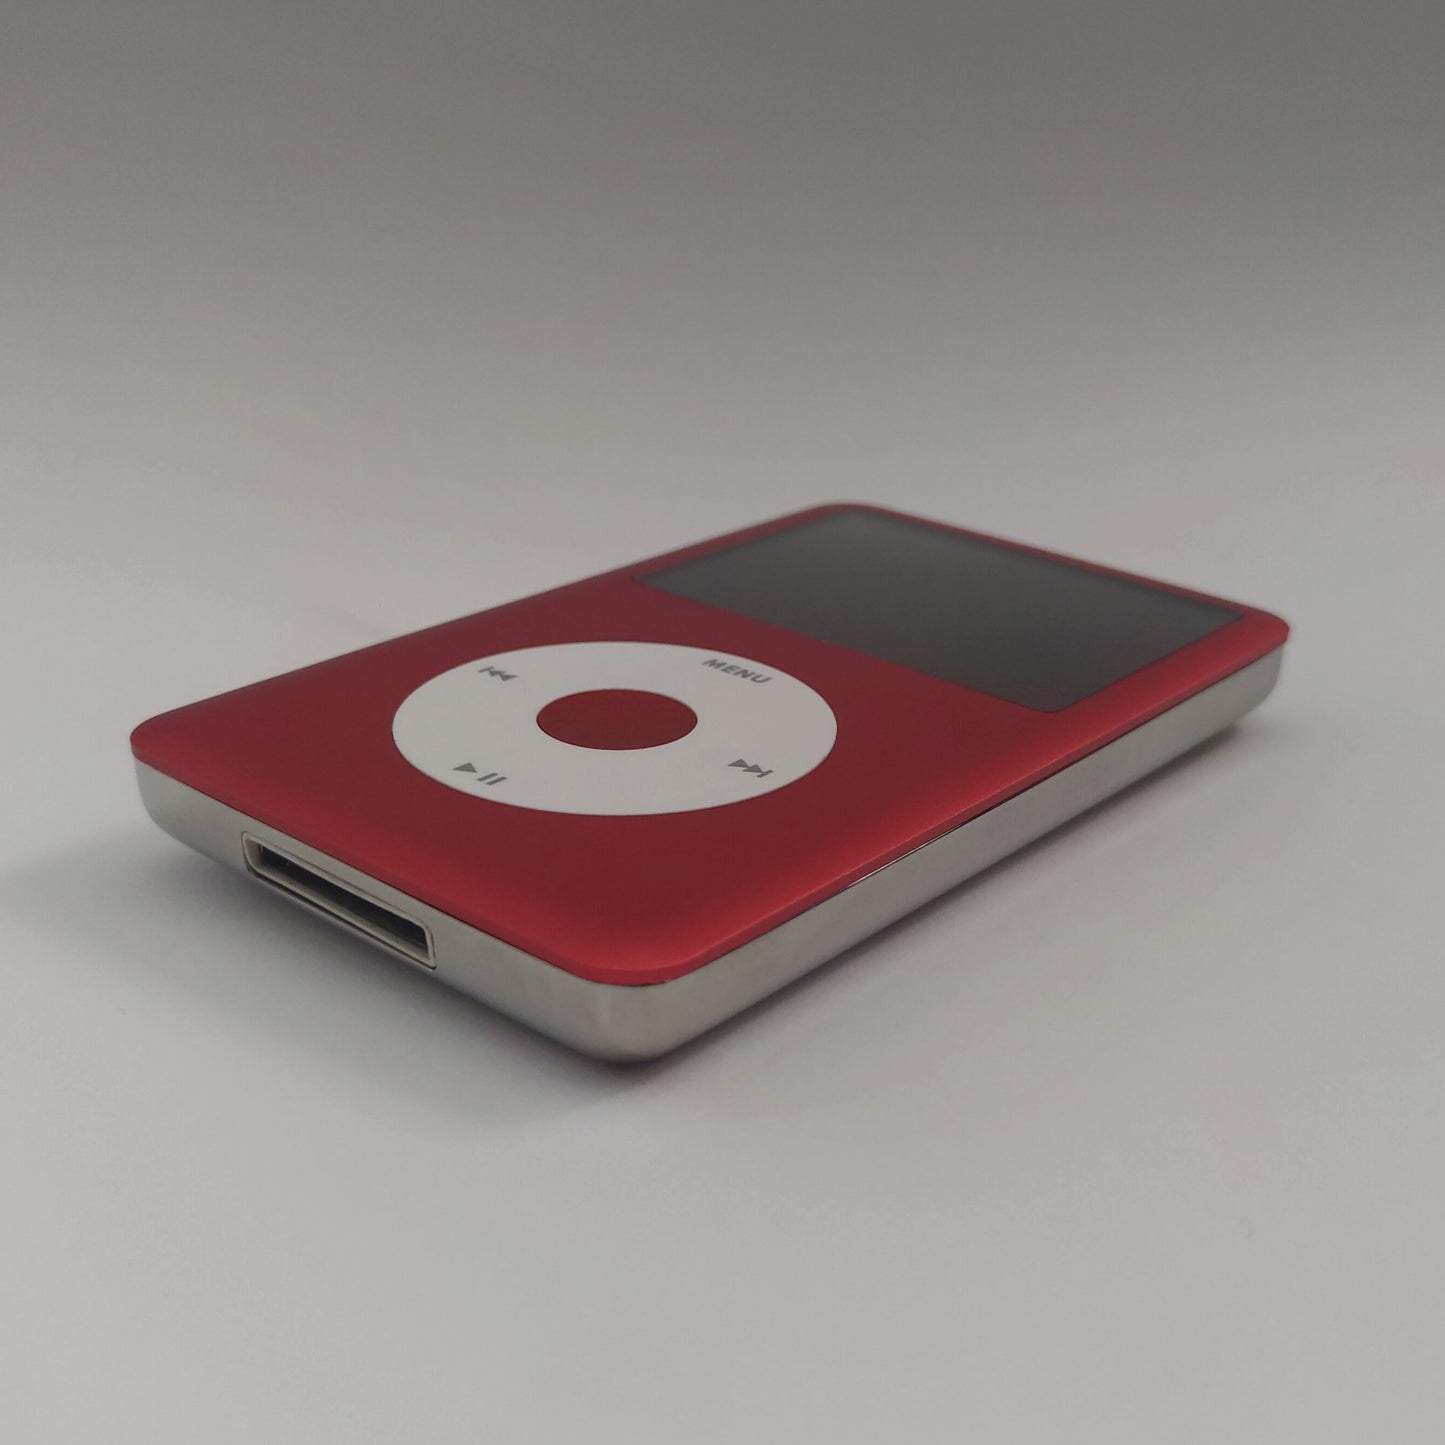 Red iPod classic with White Click Wheel side view